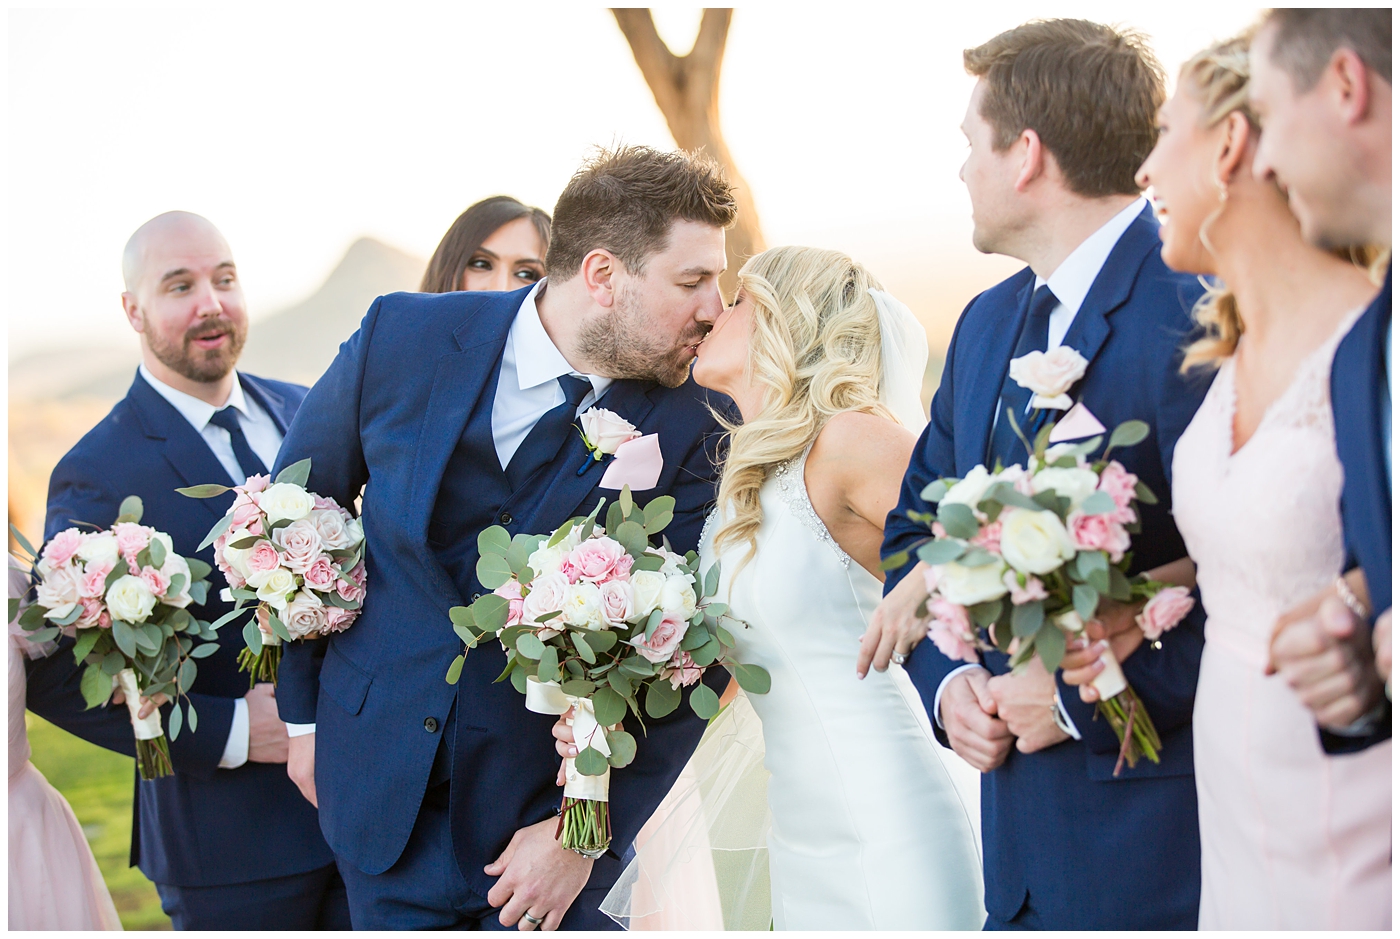 gorgeous bride with side swept hair in racerback pronovias dress and blush pink, white rose and eucalyptus greenery wedding bouquet with groom in navy suit and tie with bridal party bridesmaids in blush pink dresses and groomsmen in navy blue suits on wedding day